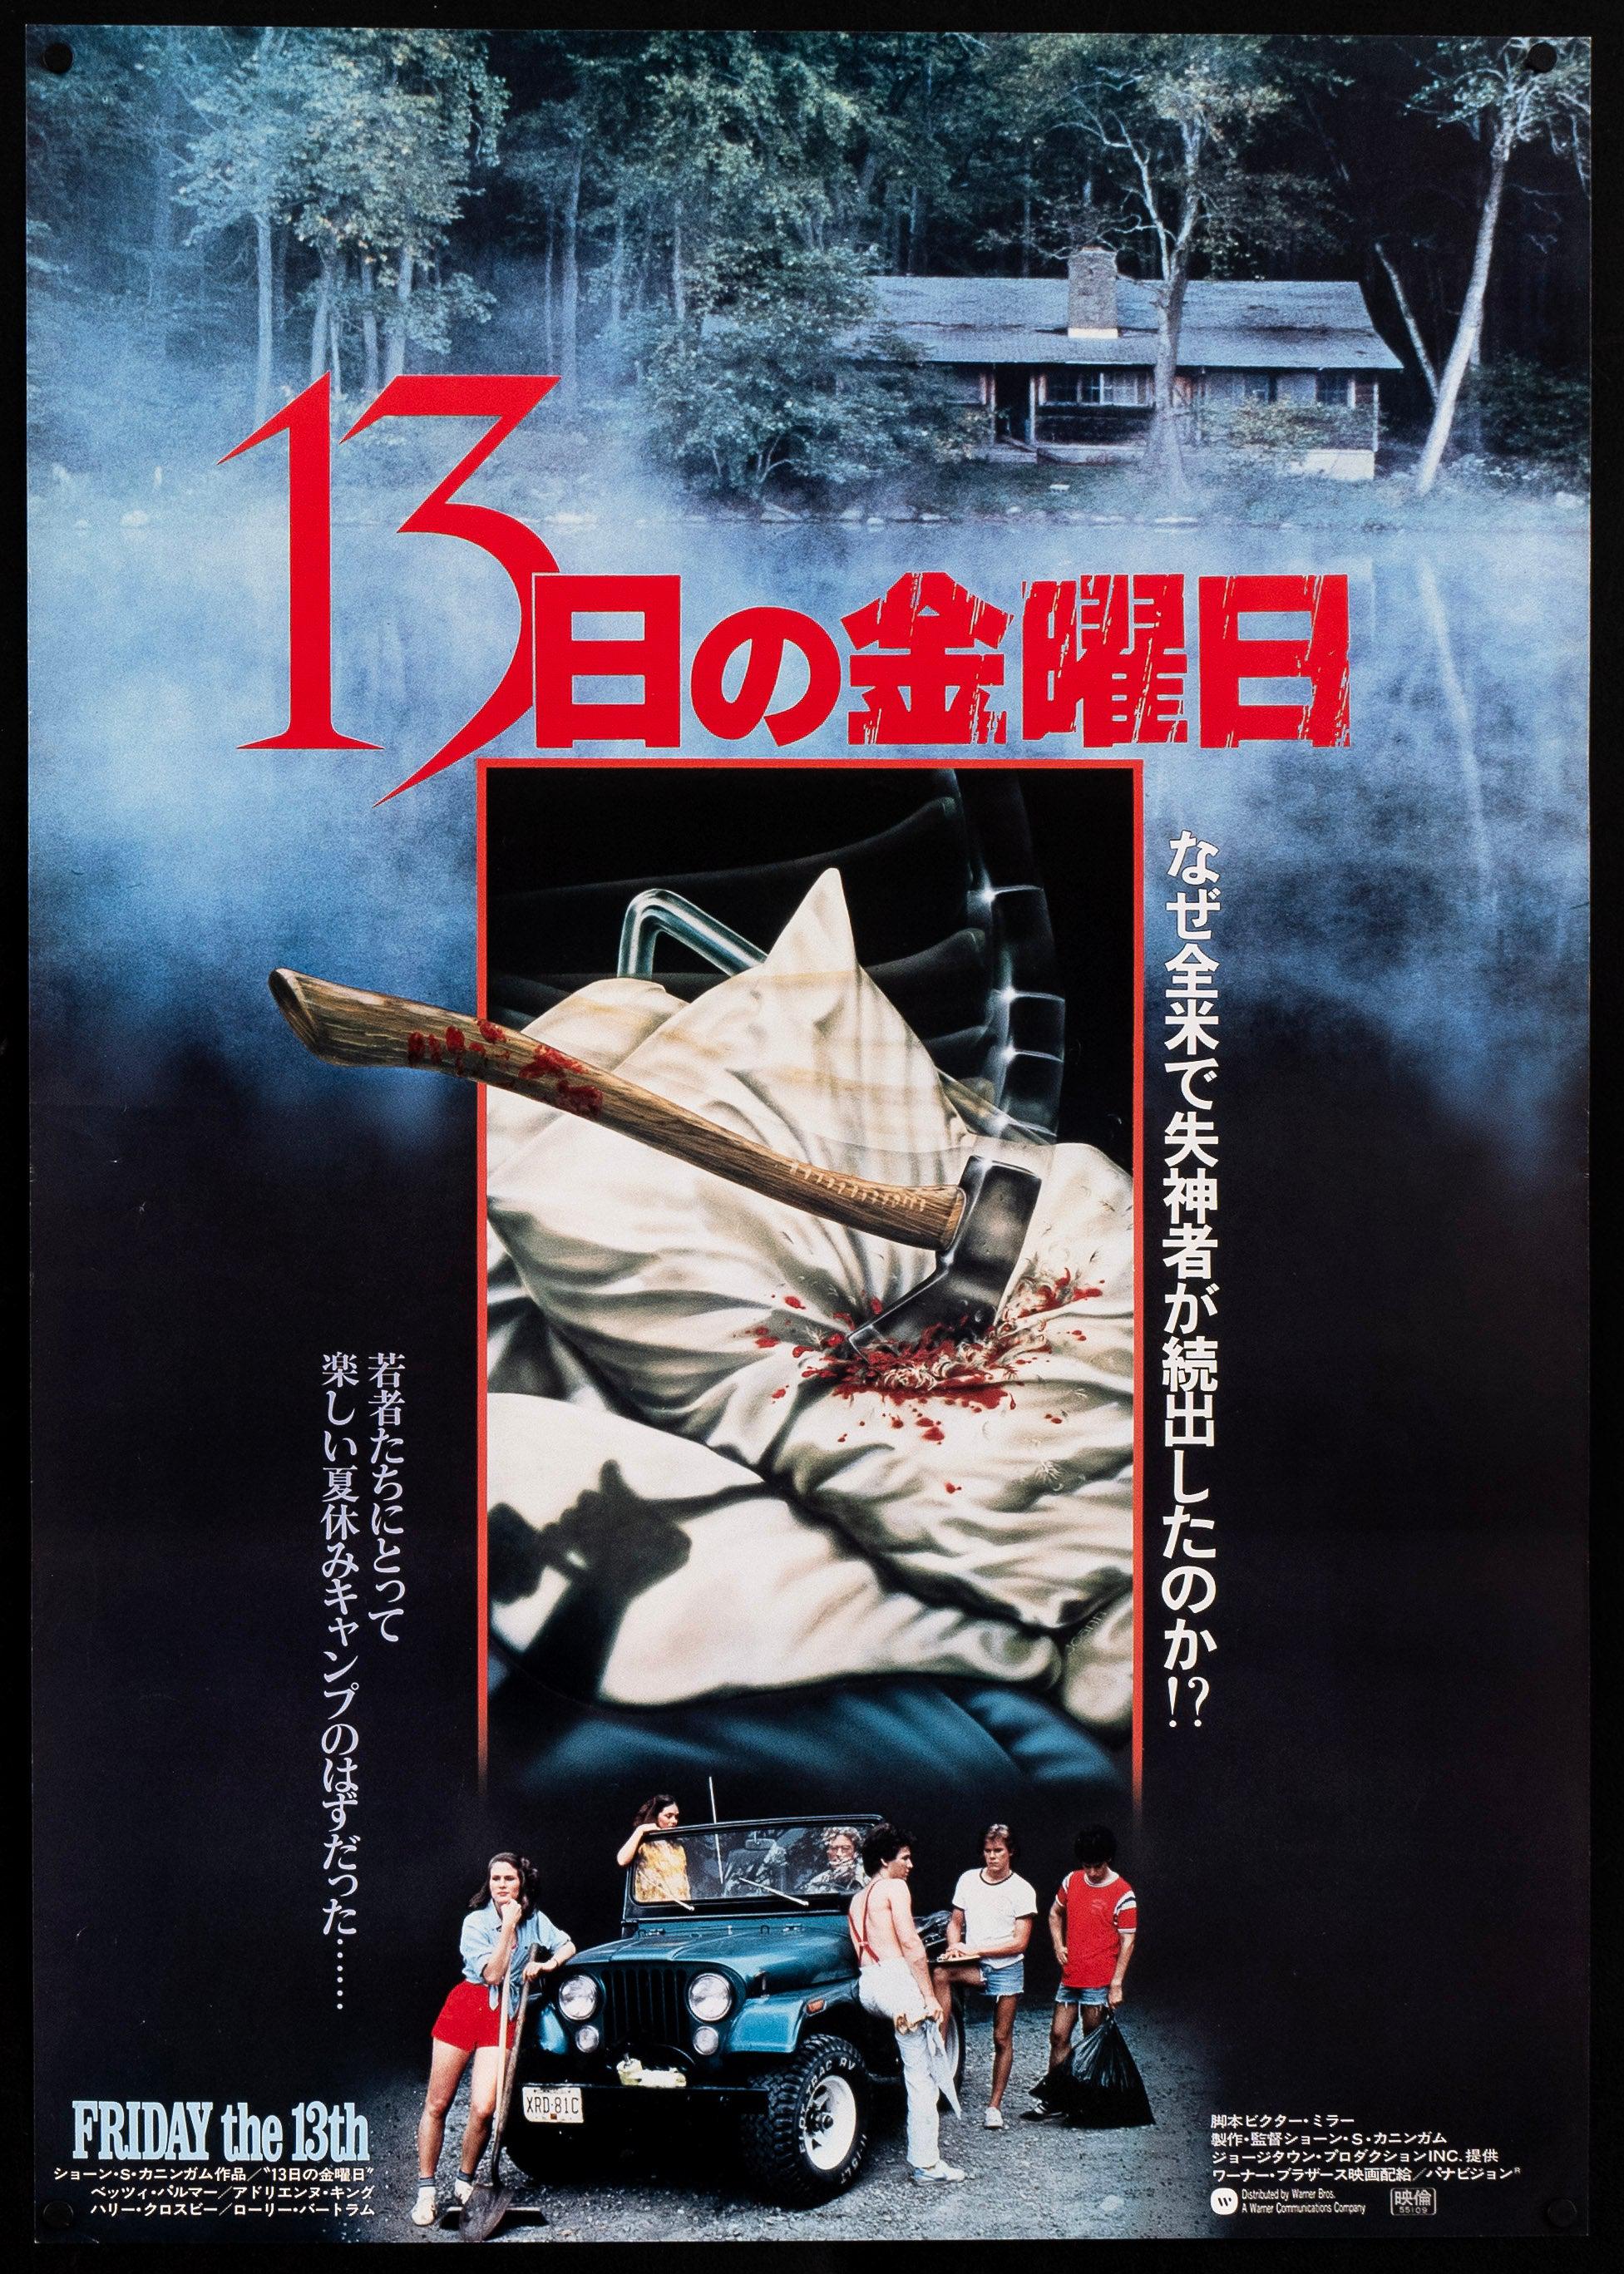 Friday the 13th Movie Poster 1980 Japanese 1 Panel (20x29)